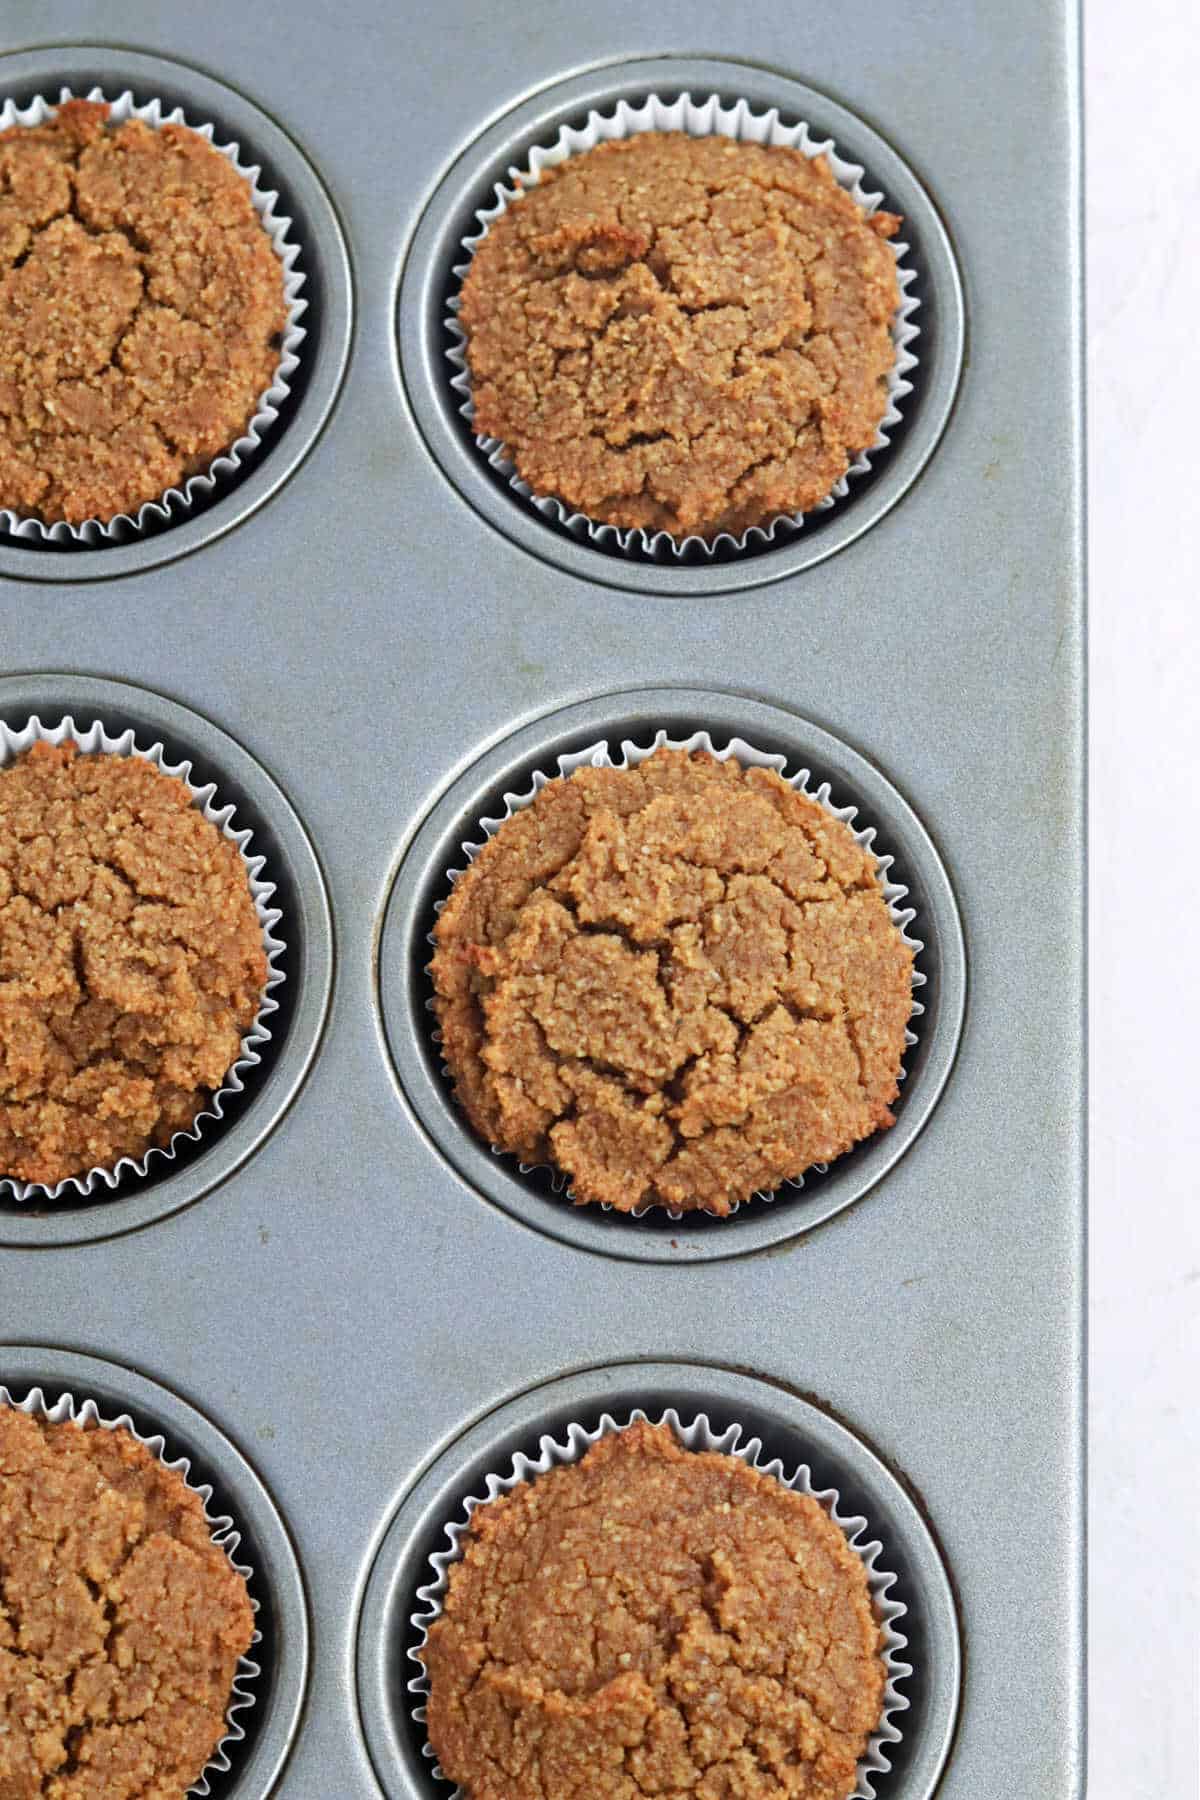 Perfectly baked cupcakes in a muffin tin.